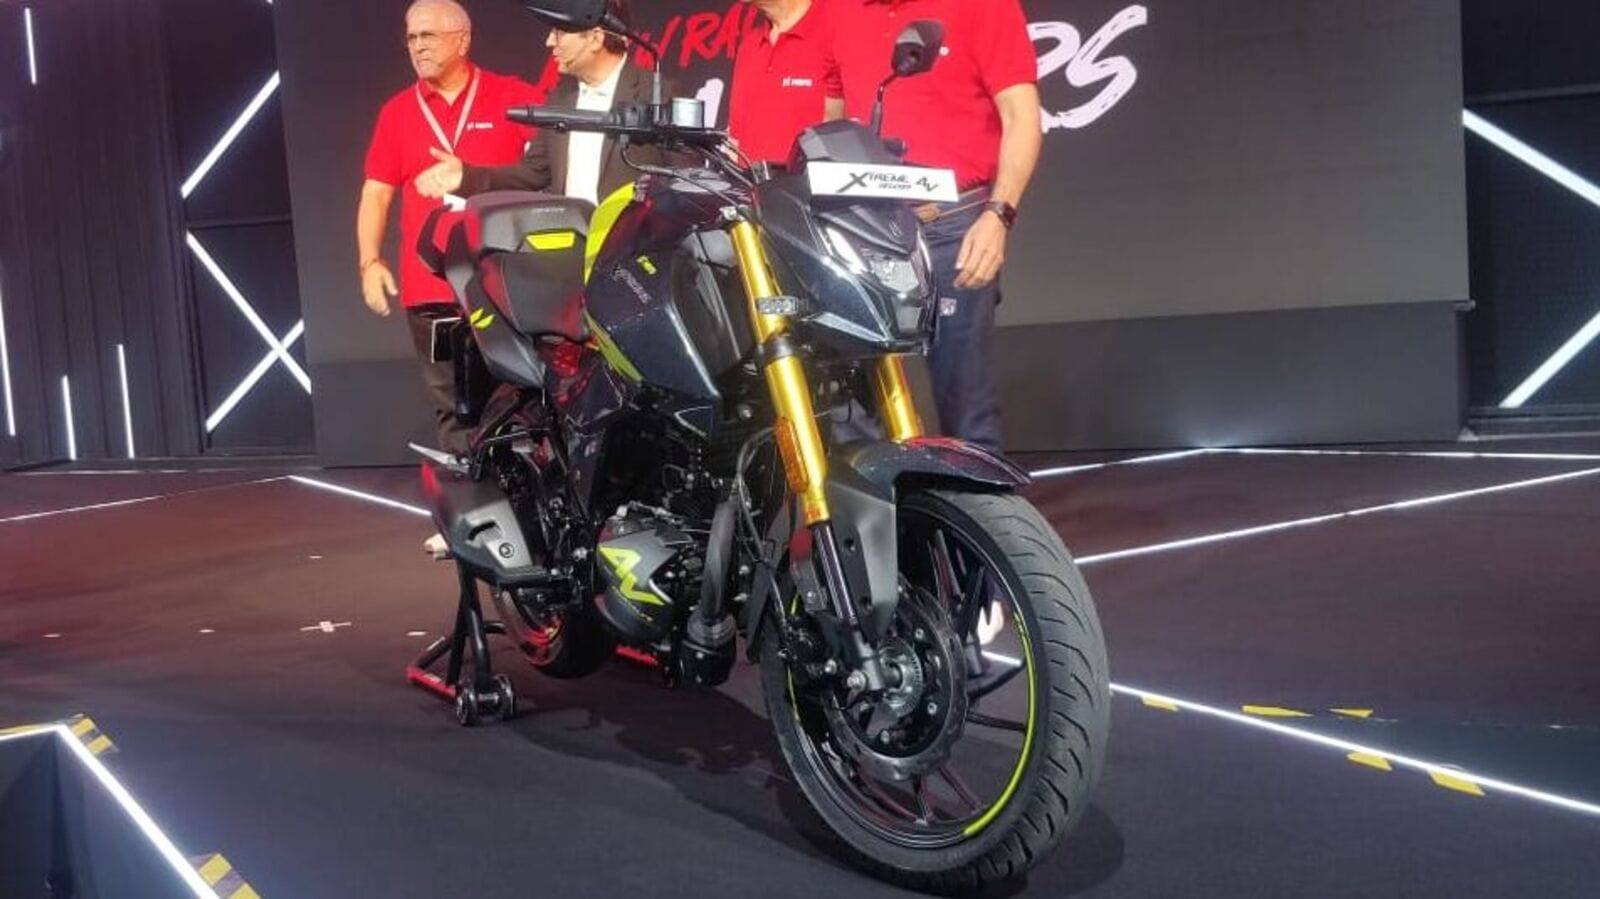 hero-xtreme-160r-4v-launched-at-1-27-lakh-gets-major-upgrades-ht-auto